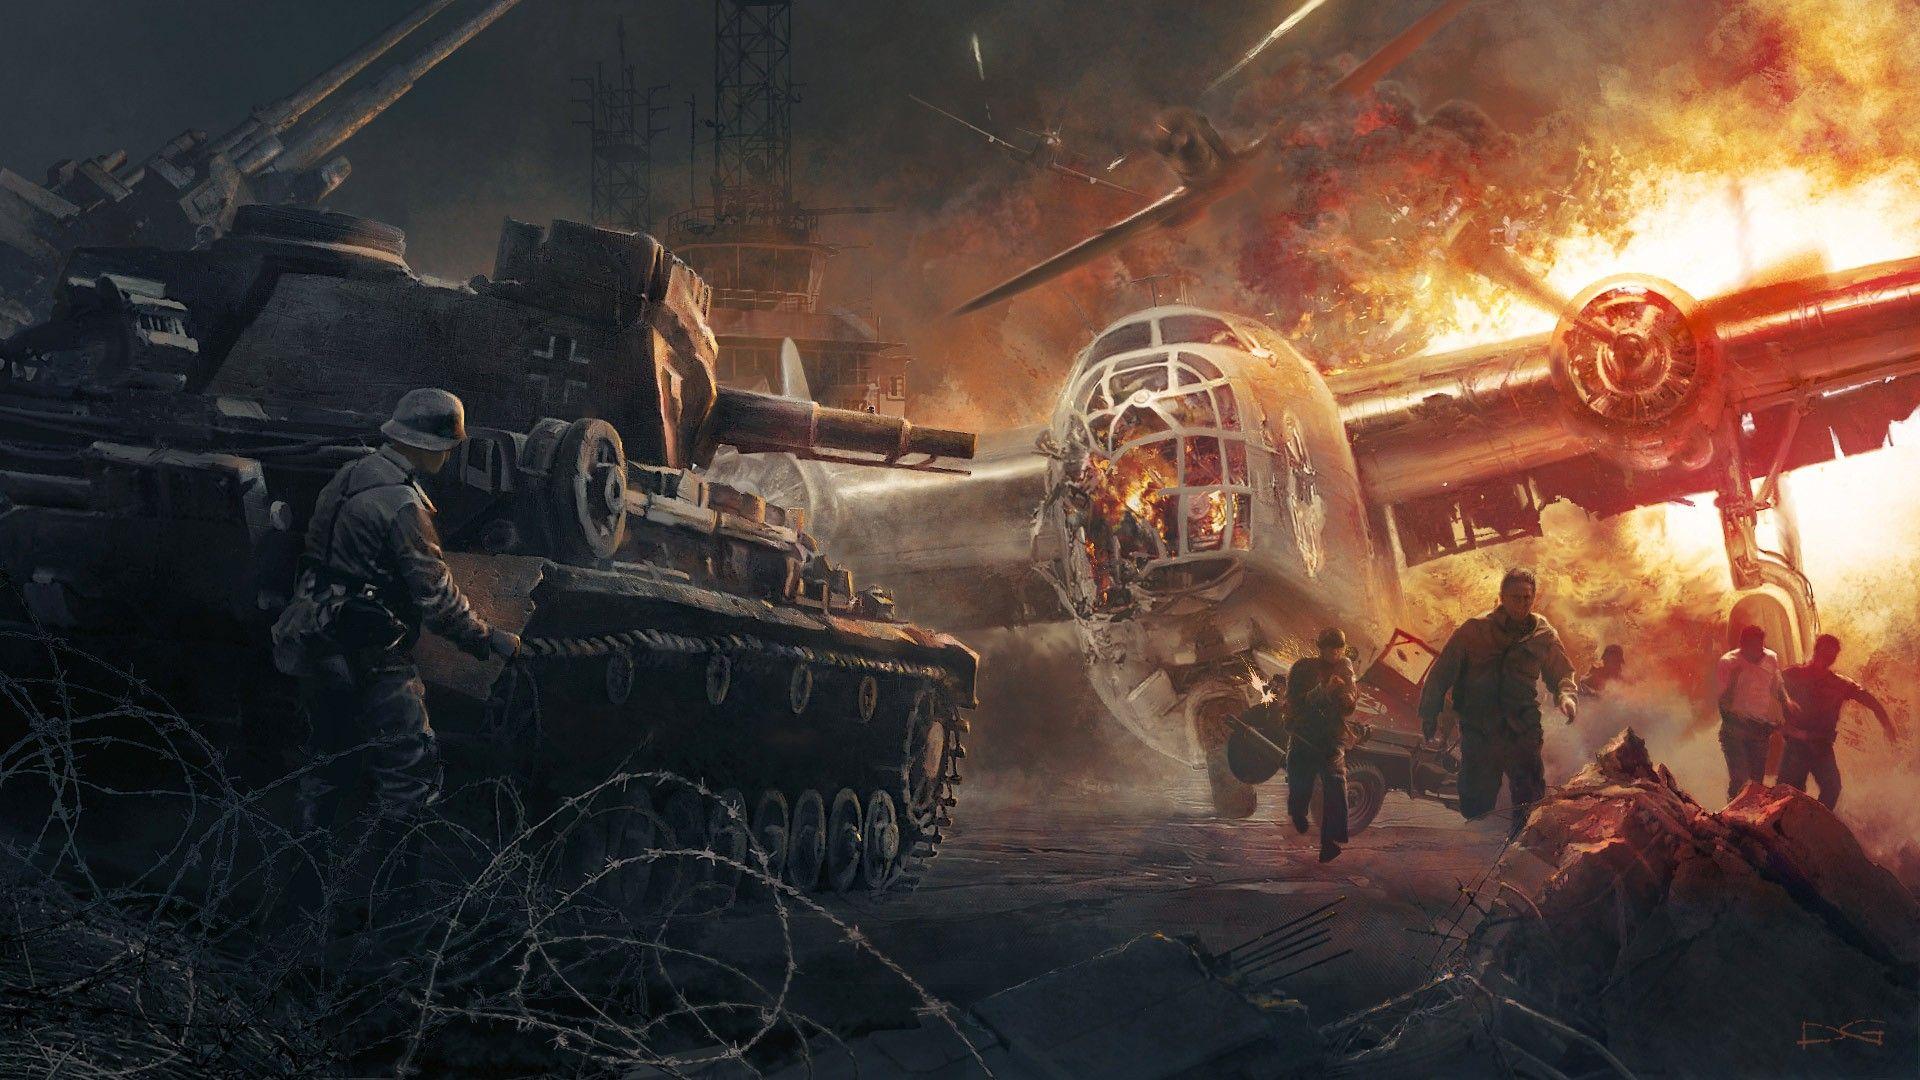 World War 2 Tank Wallpaper For Android On Wallpaper 1080p HD